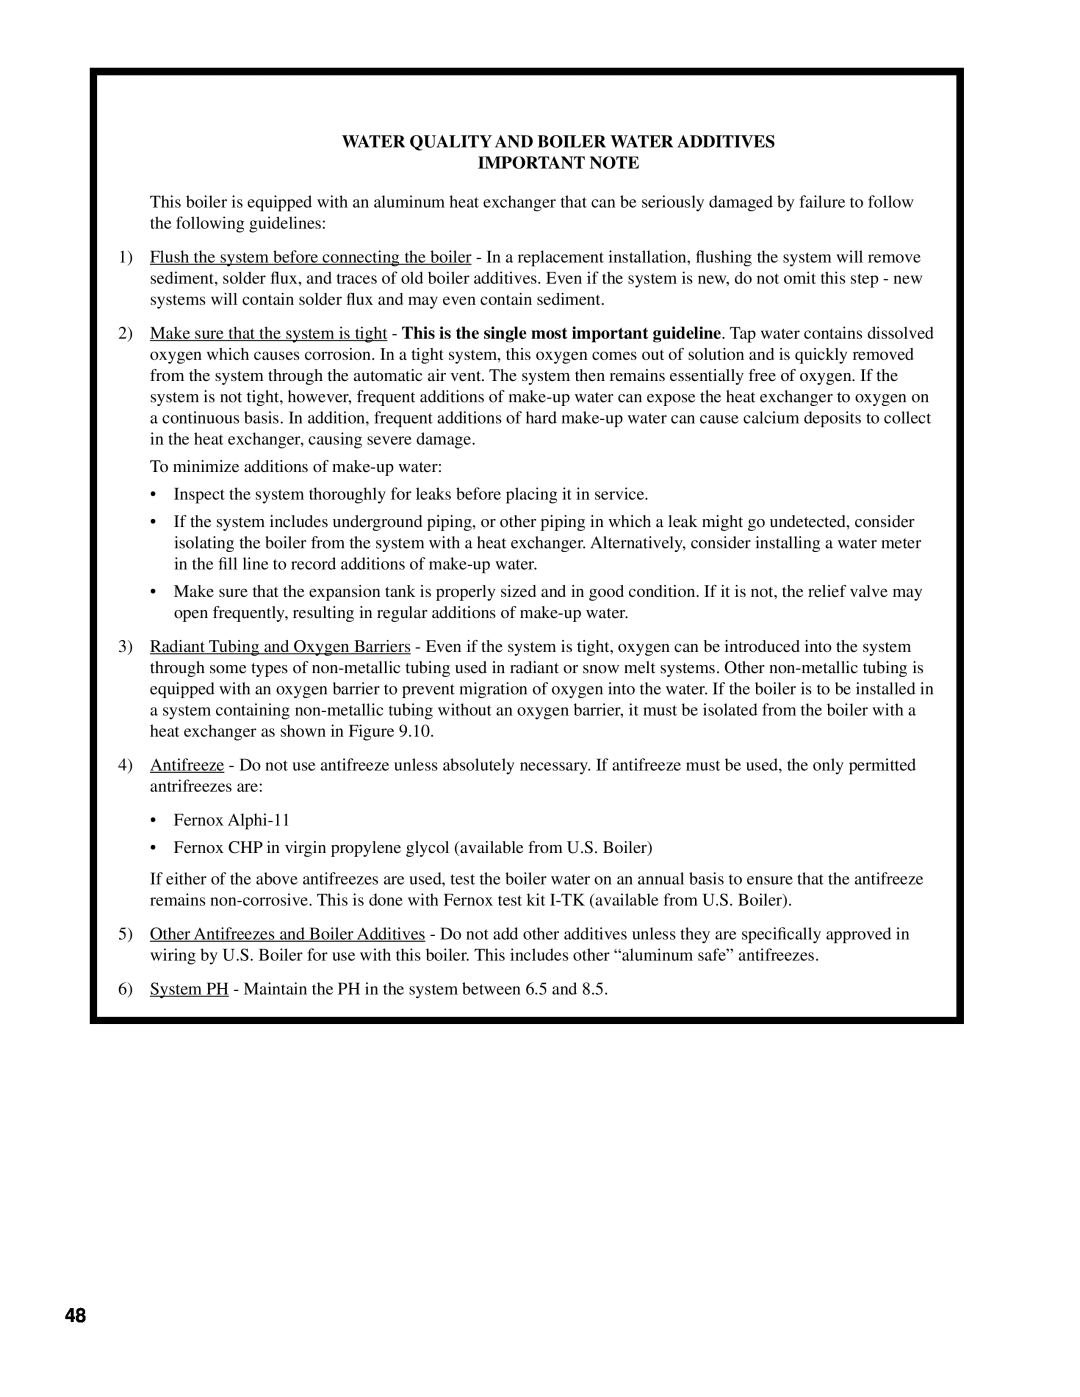 Burnham 101008-01R1-2/07 manual Water Quality And Boiler Water Additives, Important Note 